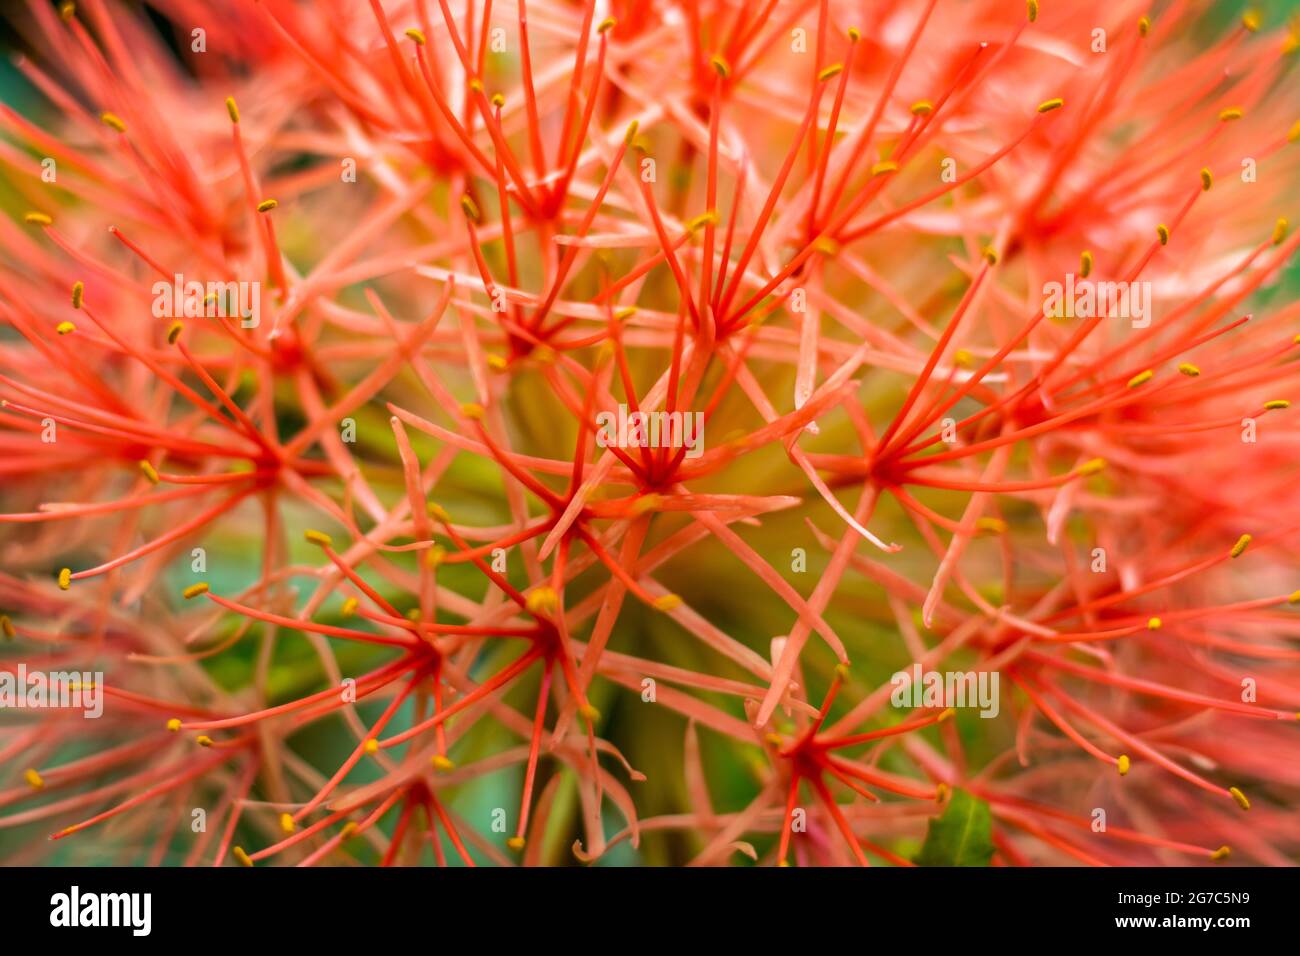 The Blood Lily or African Blood Lily is part of the Scadoxus multiflorus or Scadoxus puniceus, also known as snake lily plant, is an exotic tropical p Stock Photo